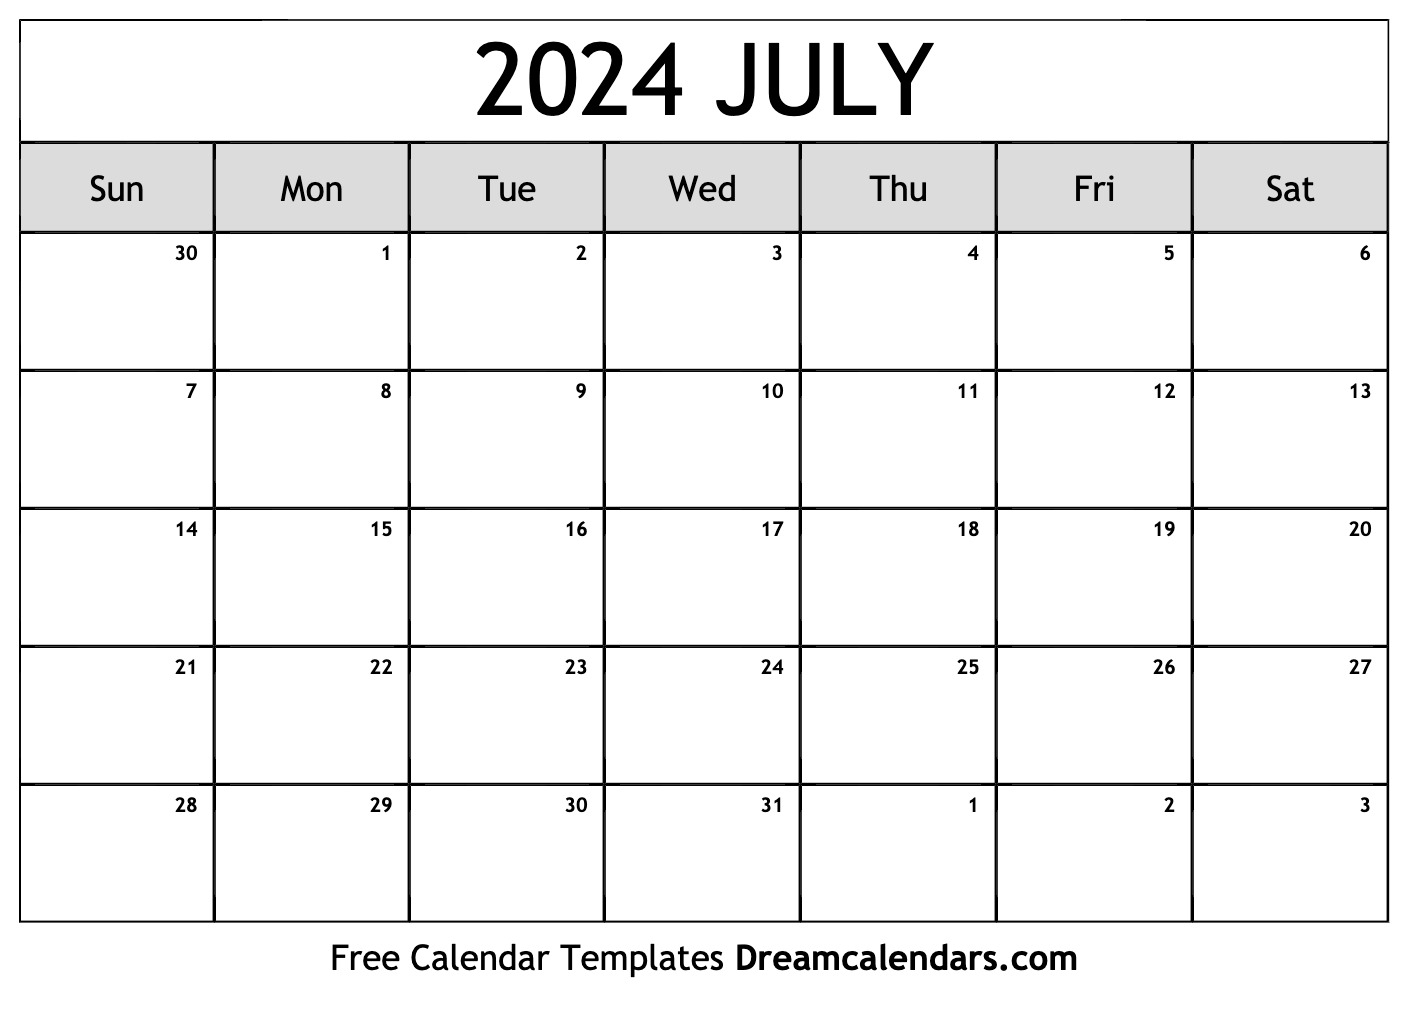 July 2024 Calendar | Free Blank Printable With Holidays for Free Printable July 2024 Calendar With Holidays